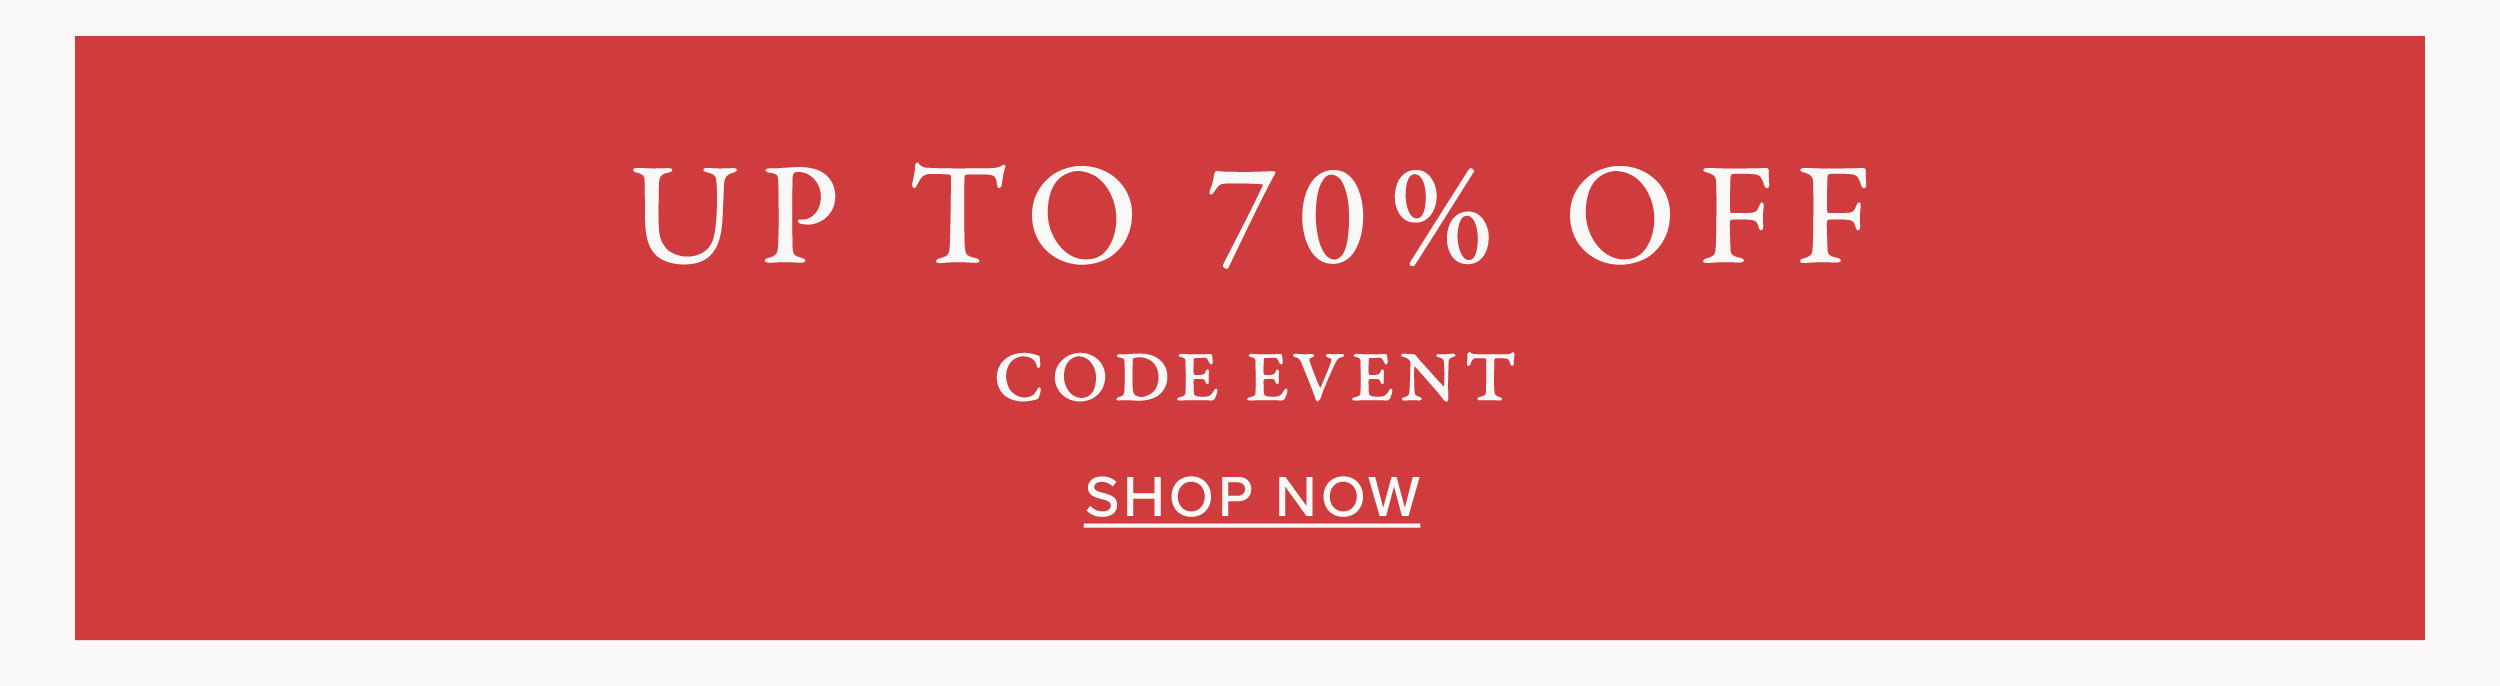 Up to 70% Off